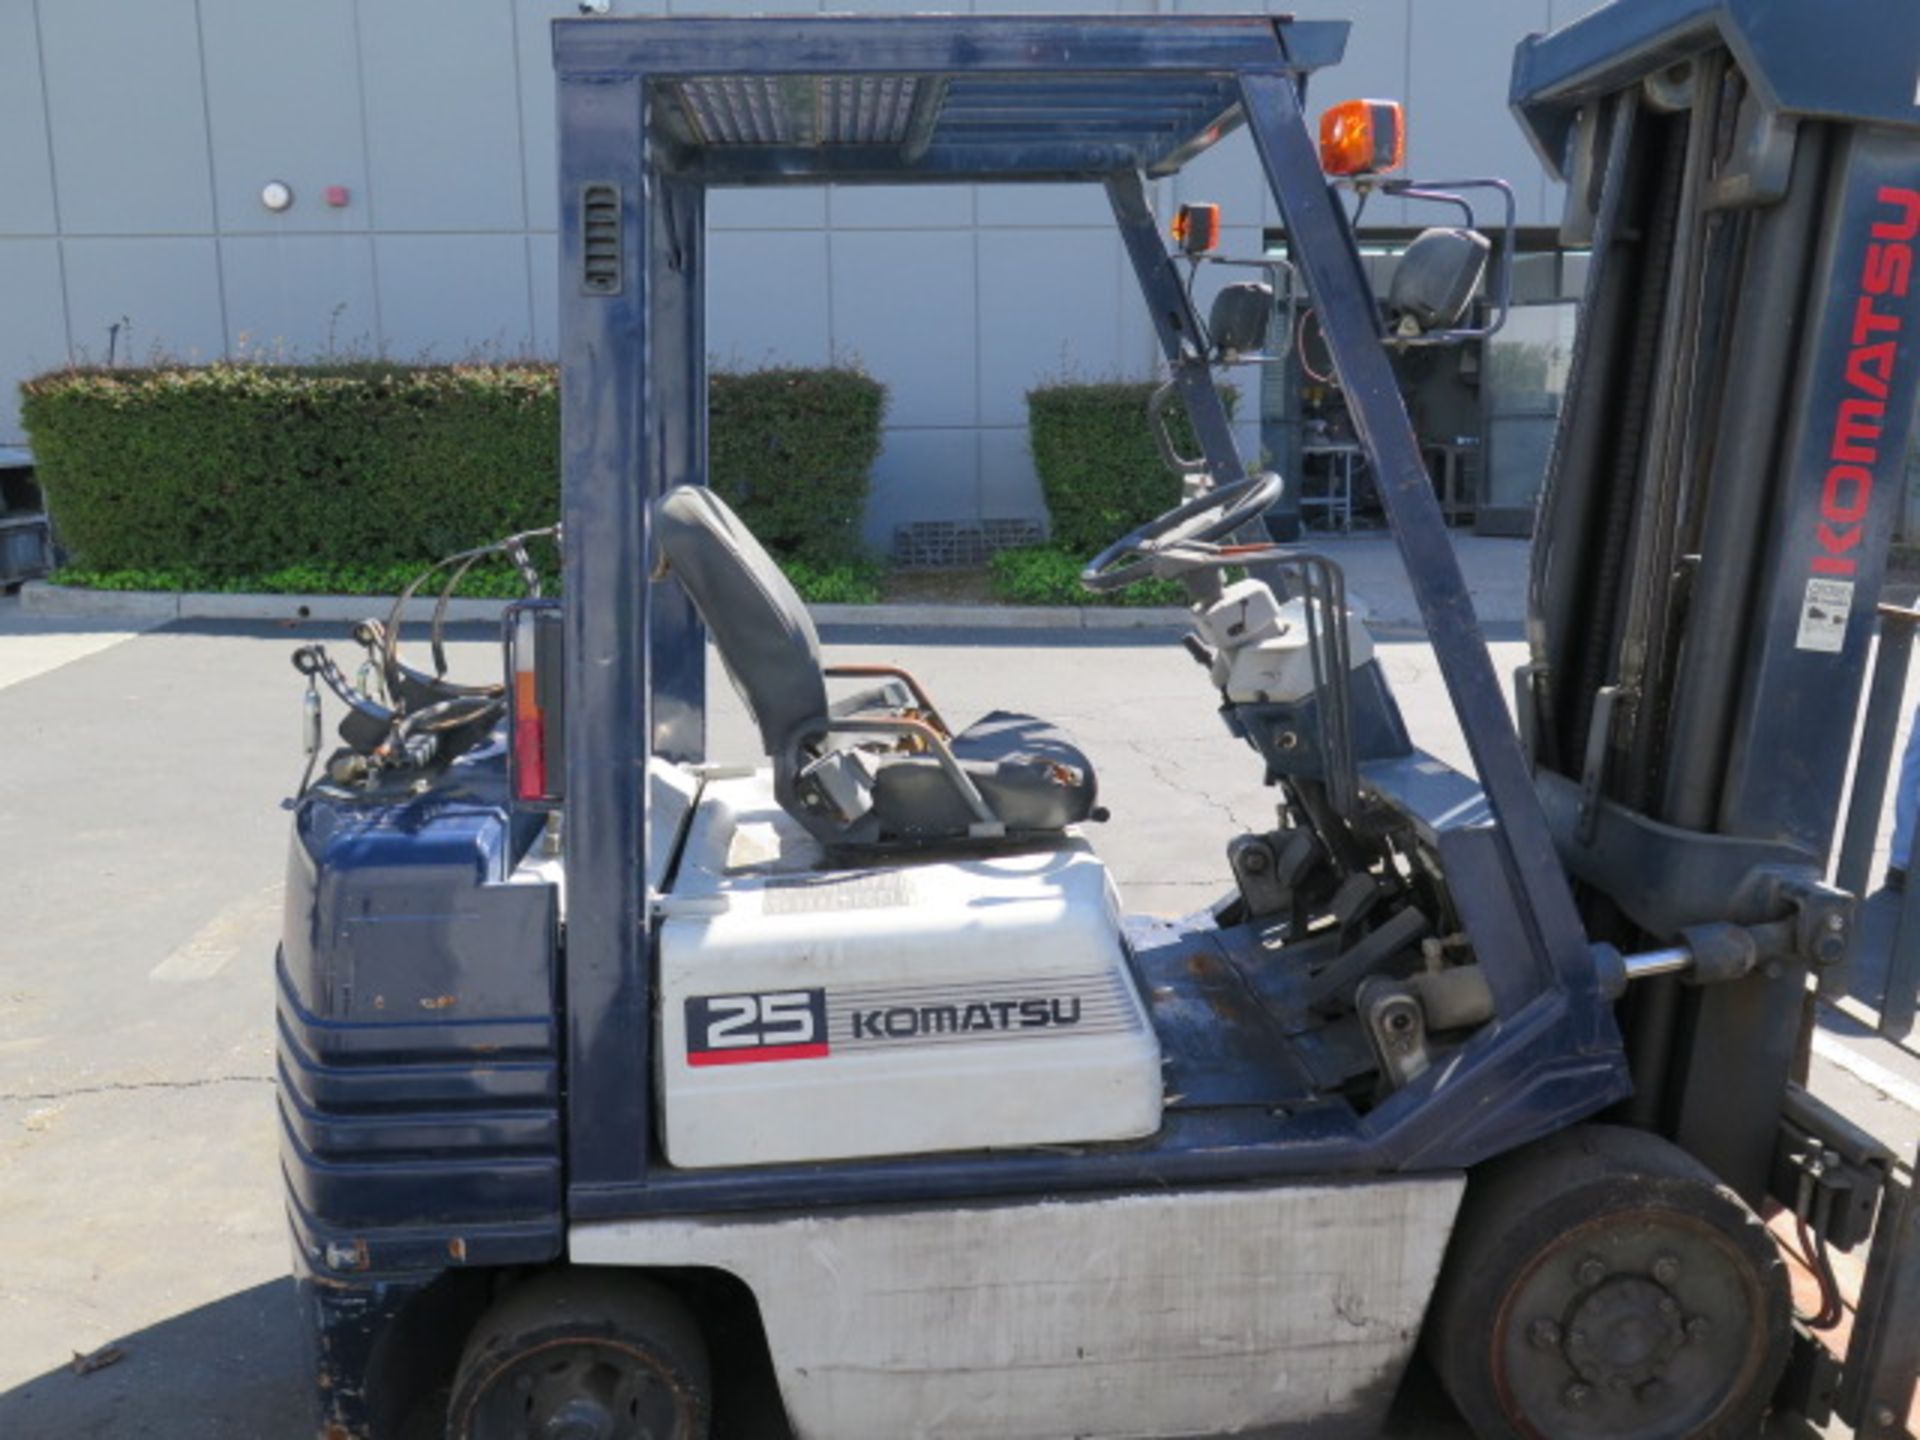 Komatsu 5000 Lb Cap LPG Forklift w/ 3-Stage Mast, Side Shift, 4th Actuator Lever, SOLD AS IS - Image 4 of 21